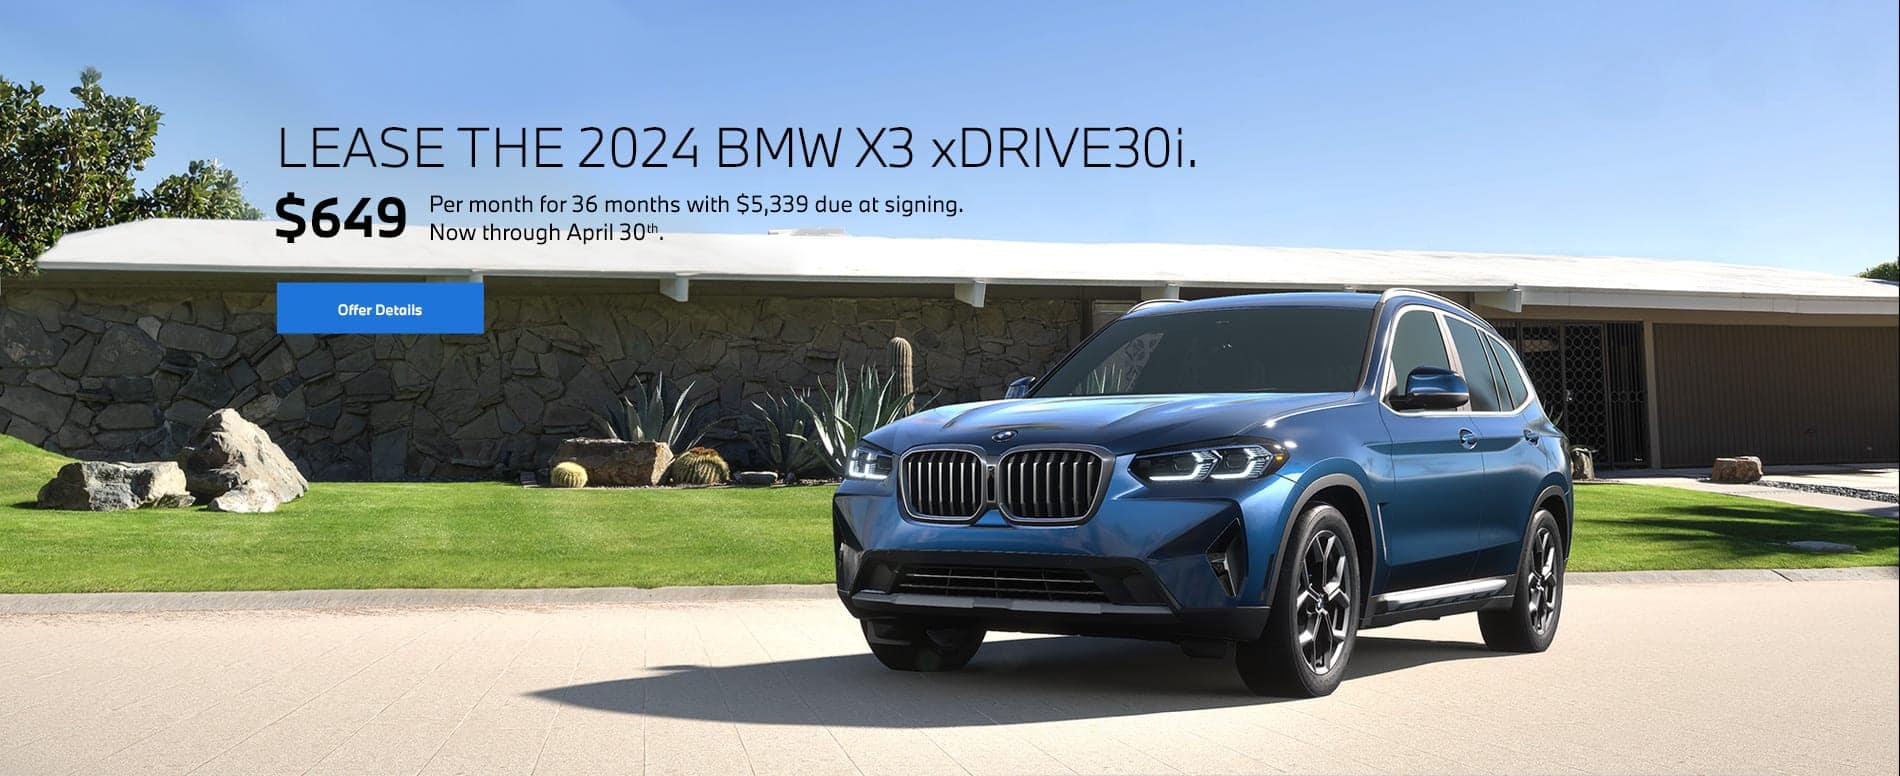 2024 X3 lease starting at $649 per month for 36 months